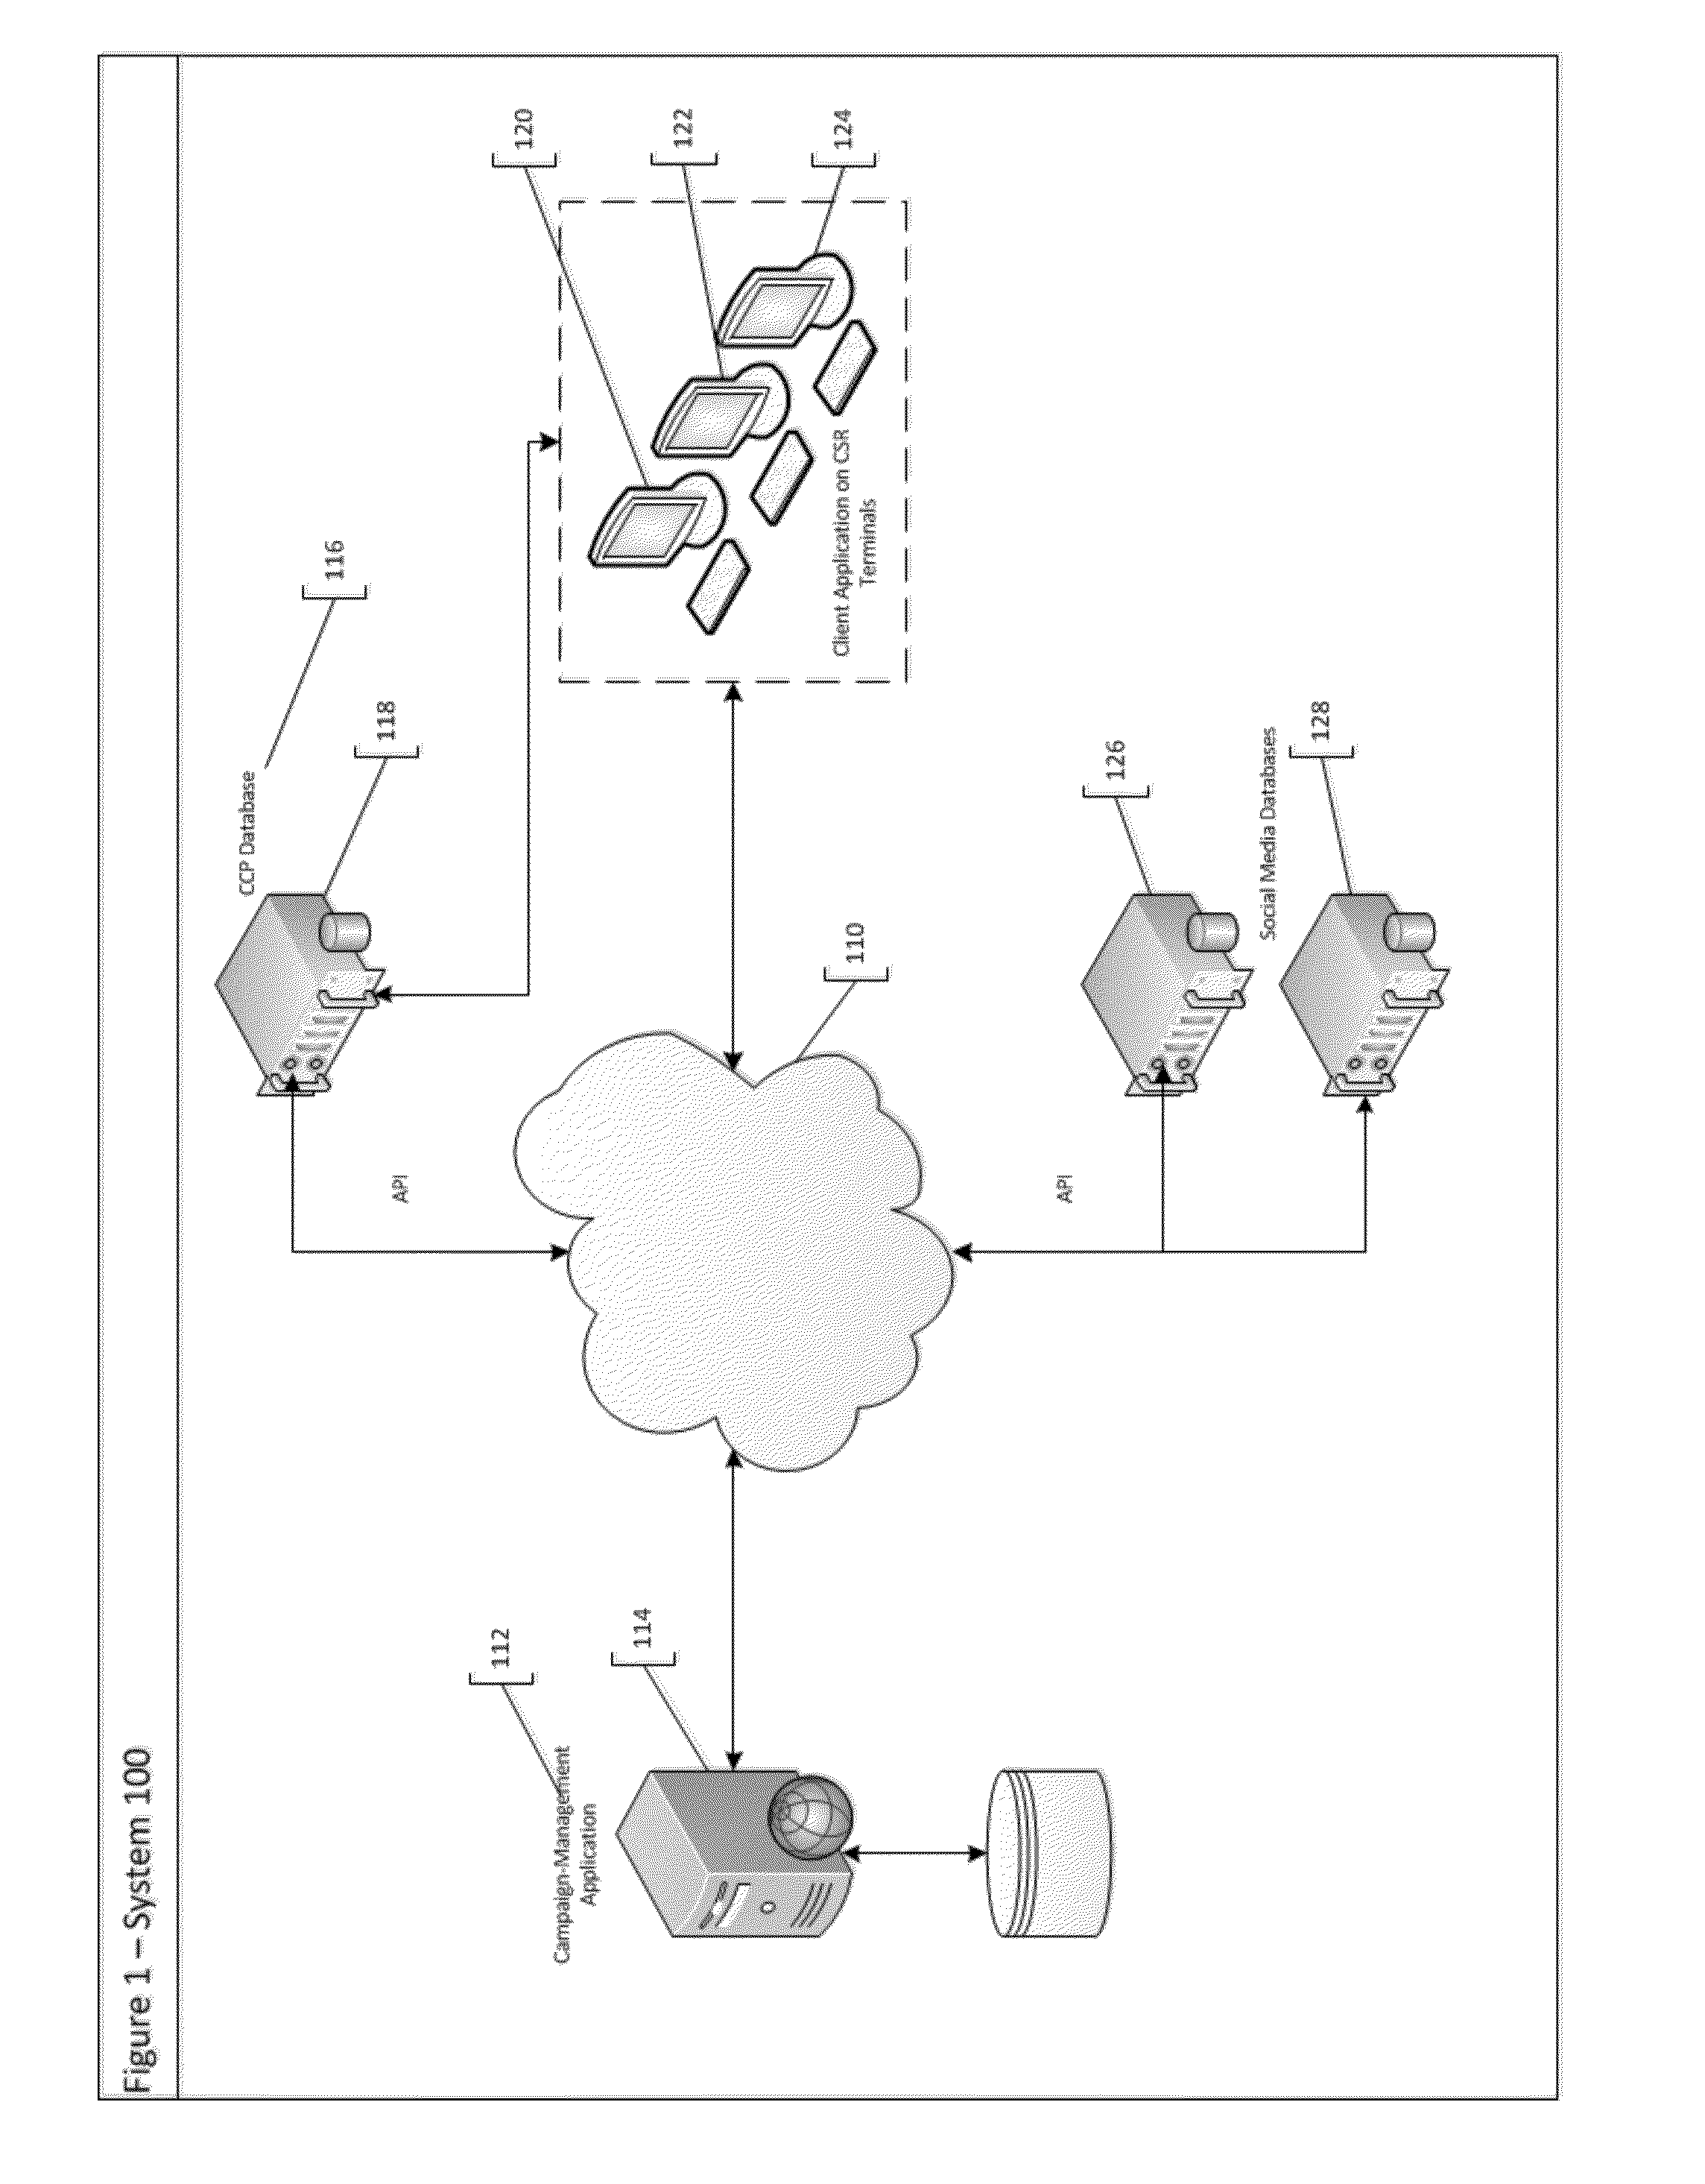 System and method for the selection and delivery of a customized consumer offer or engagement dialog by a live customer service representative in communication with a consumer